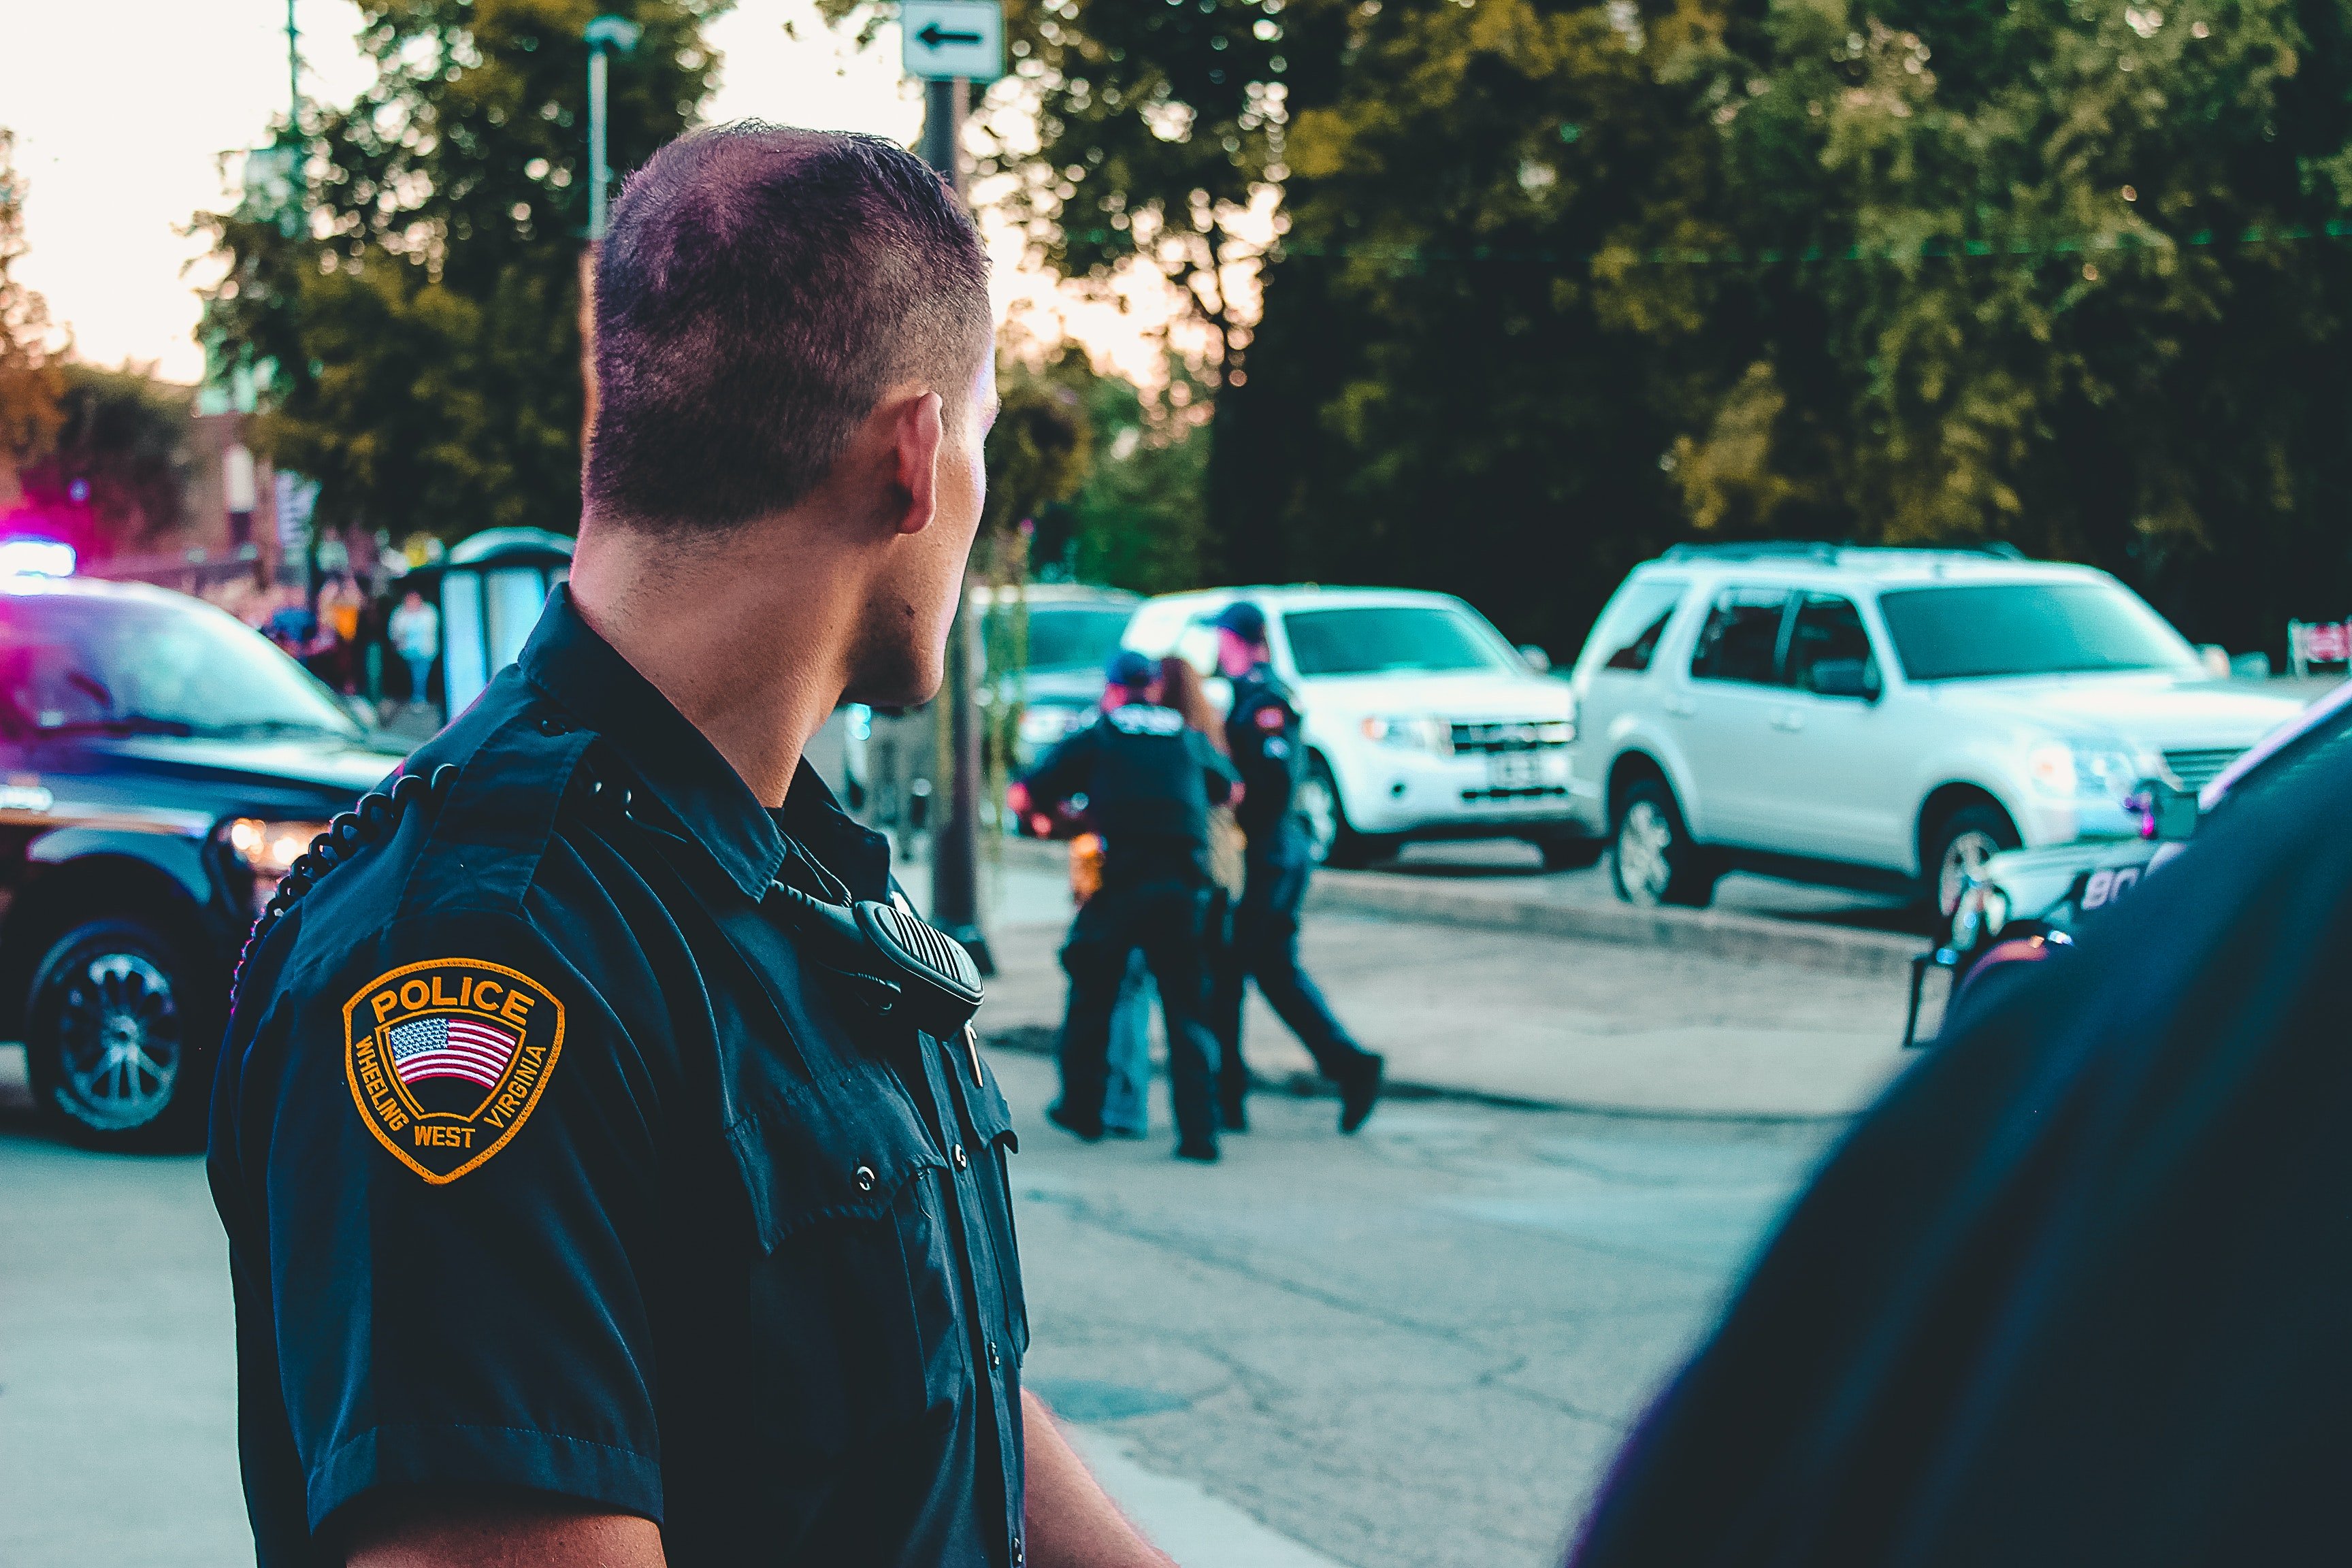 An officer looking back toward the scene behind him. | Source: Pexels/ Rosemary Ketchum